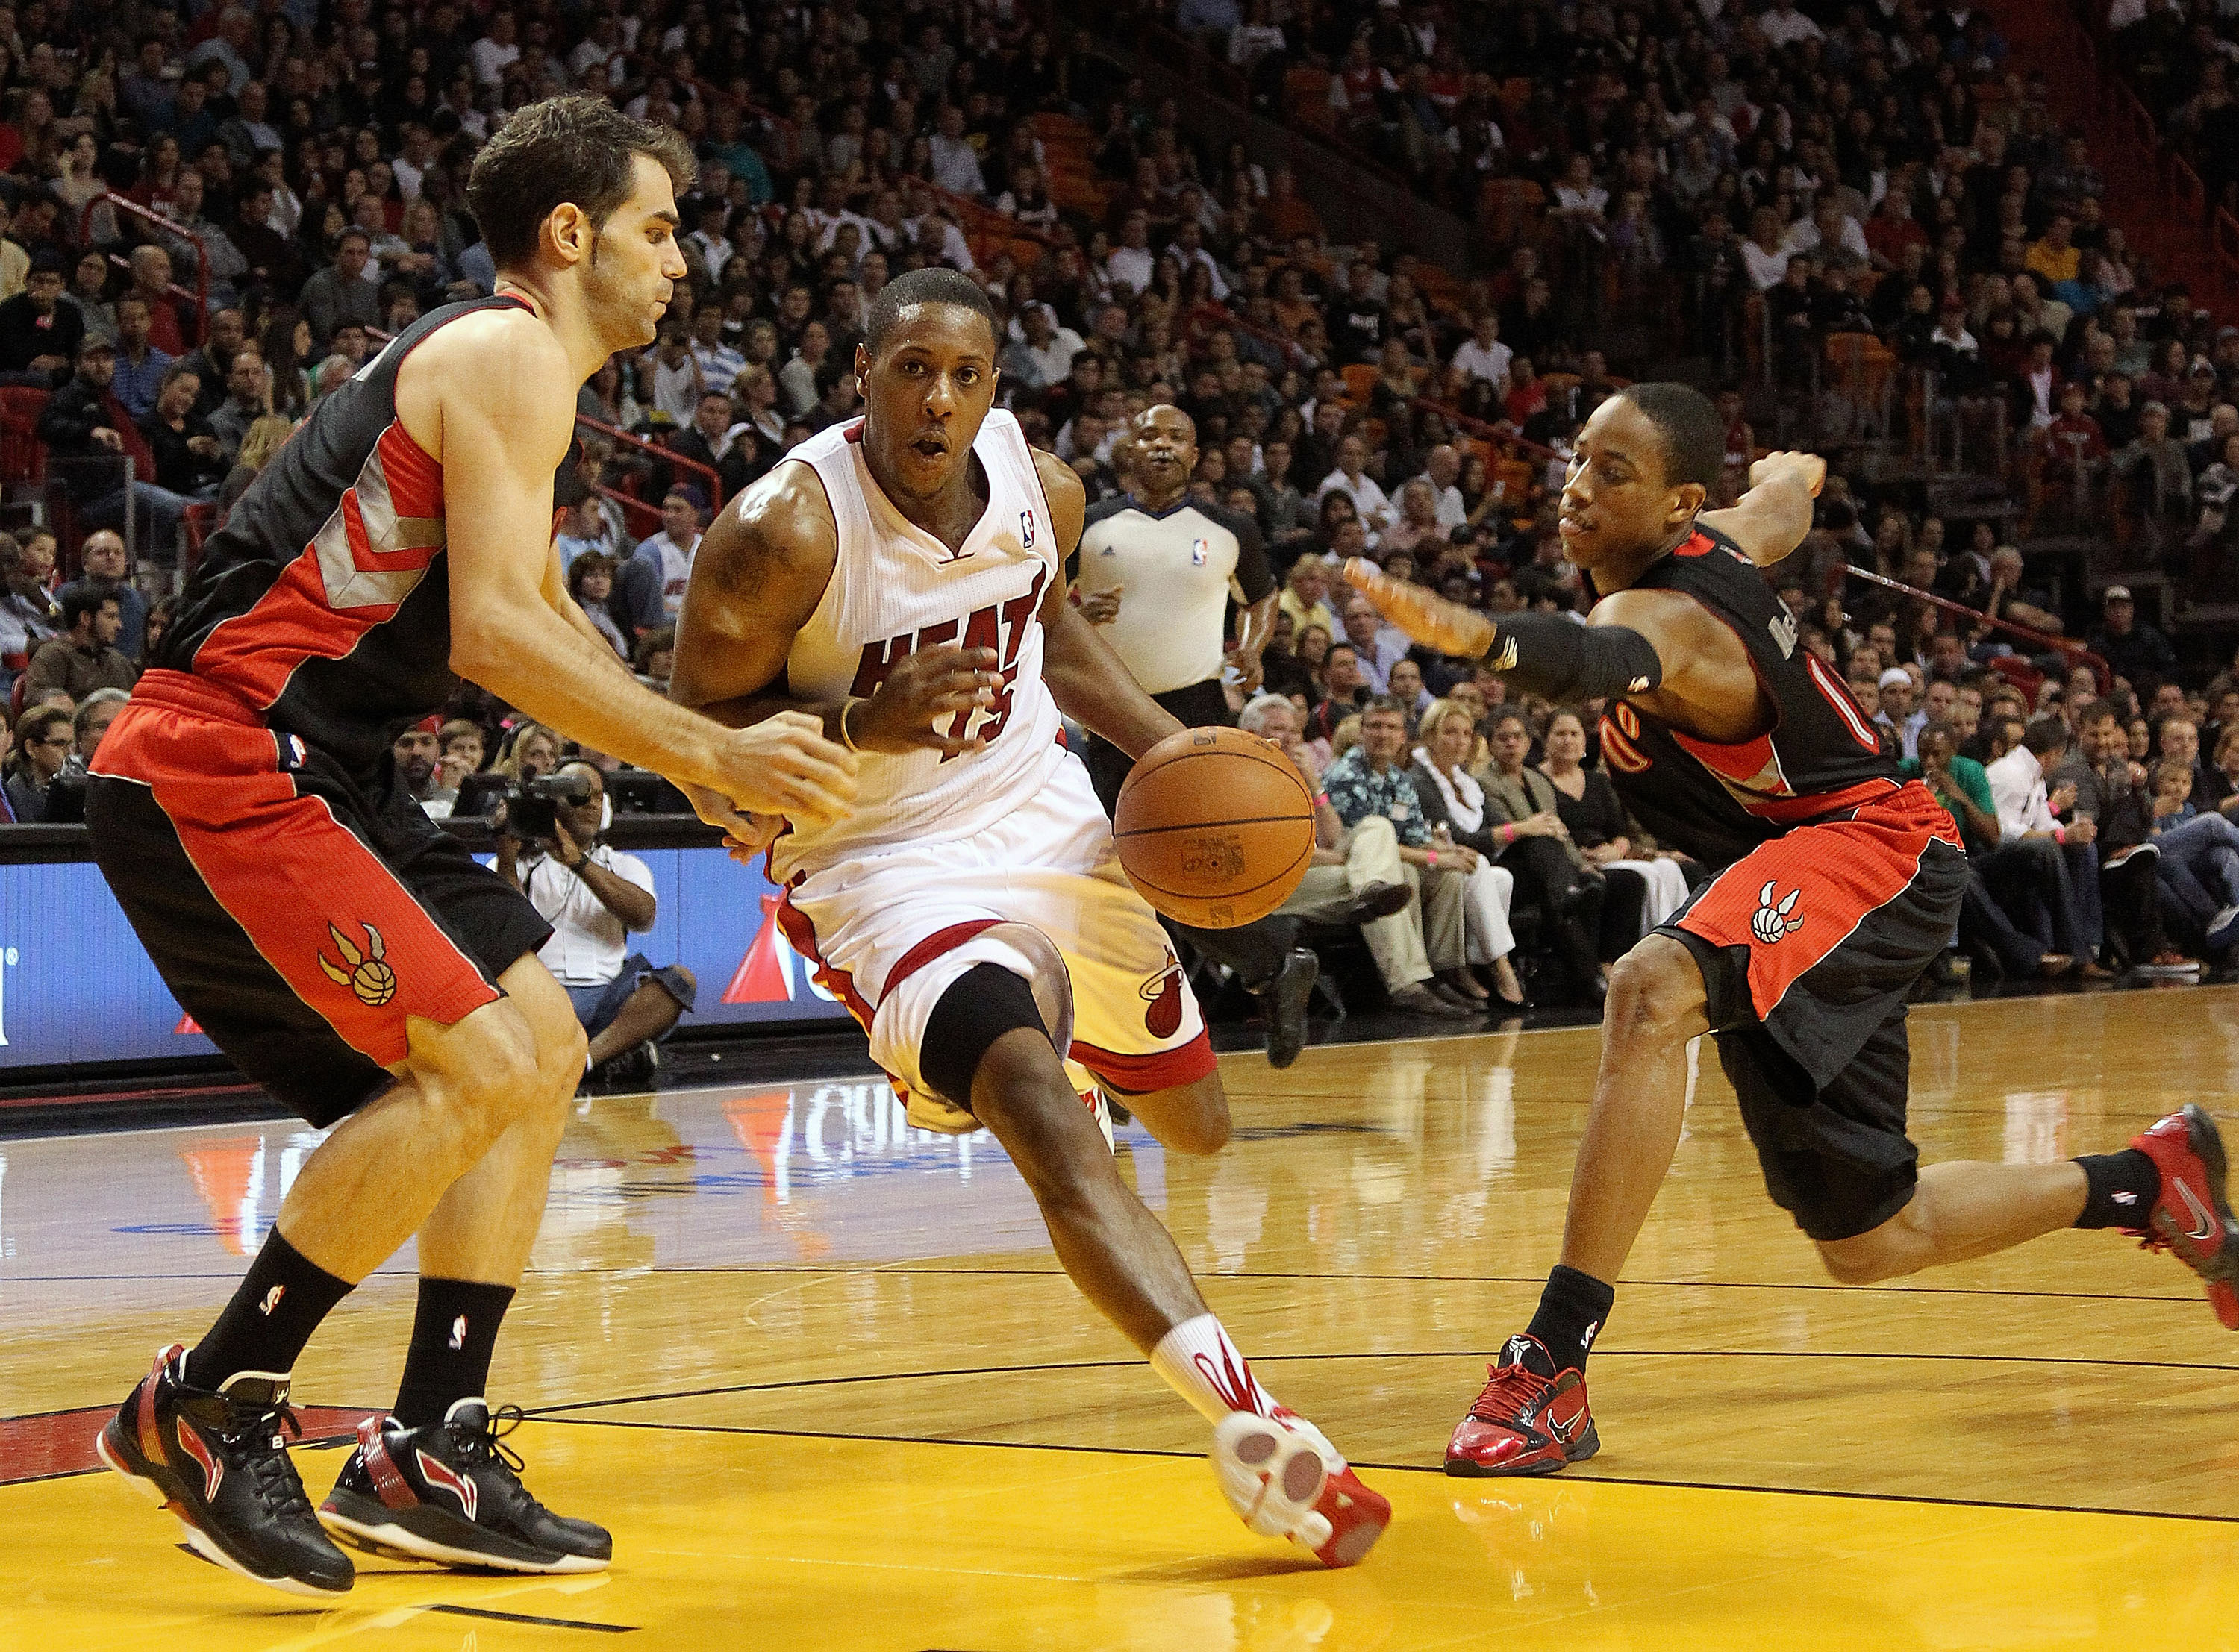 MIAMI, FL - JANUARY 22: Mario Chalmers #15 of the Miami Heat dribbles through DeMar DeRozan #10 and Jose Calderon #8 of the Toronto Raptors during a game at American Airlines Arena on January 22, 2011 in Miami, Florida. NOTE TO USER: User expressly acknow